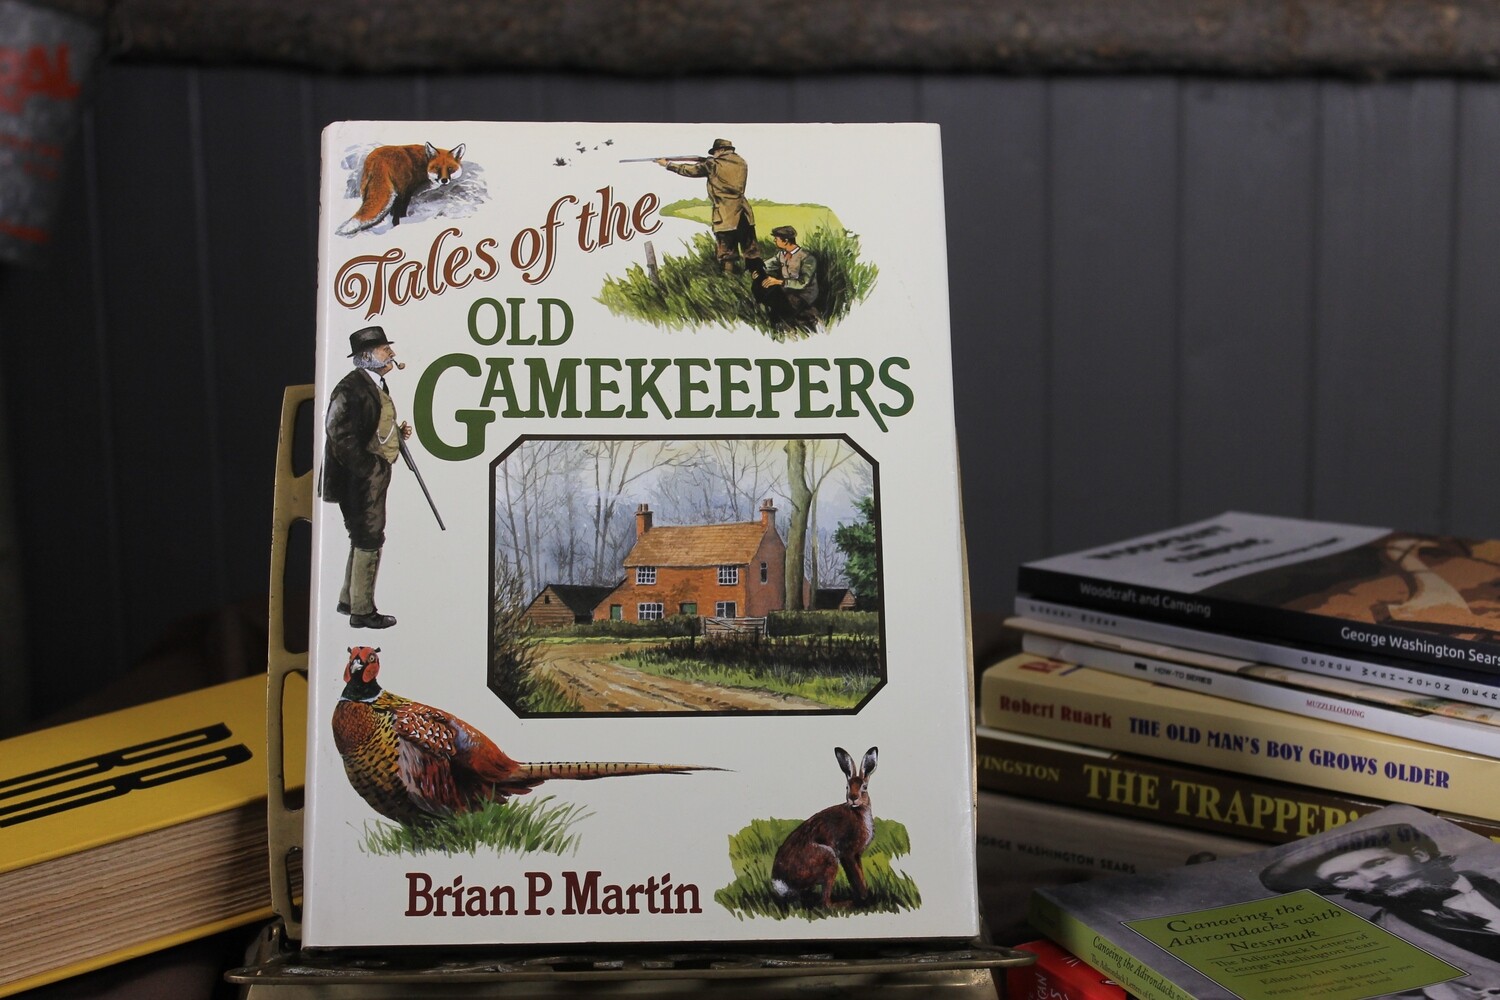 Tales of Old Gamekeepers by Brian P. Martin